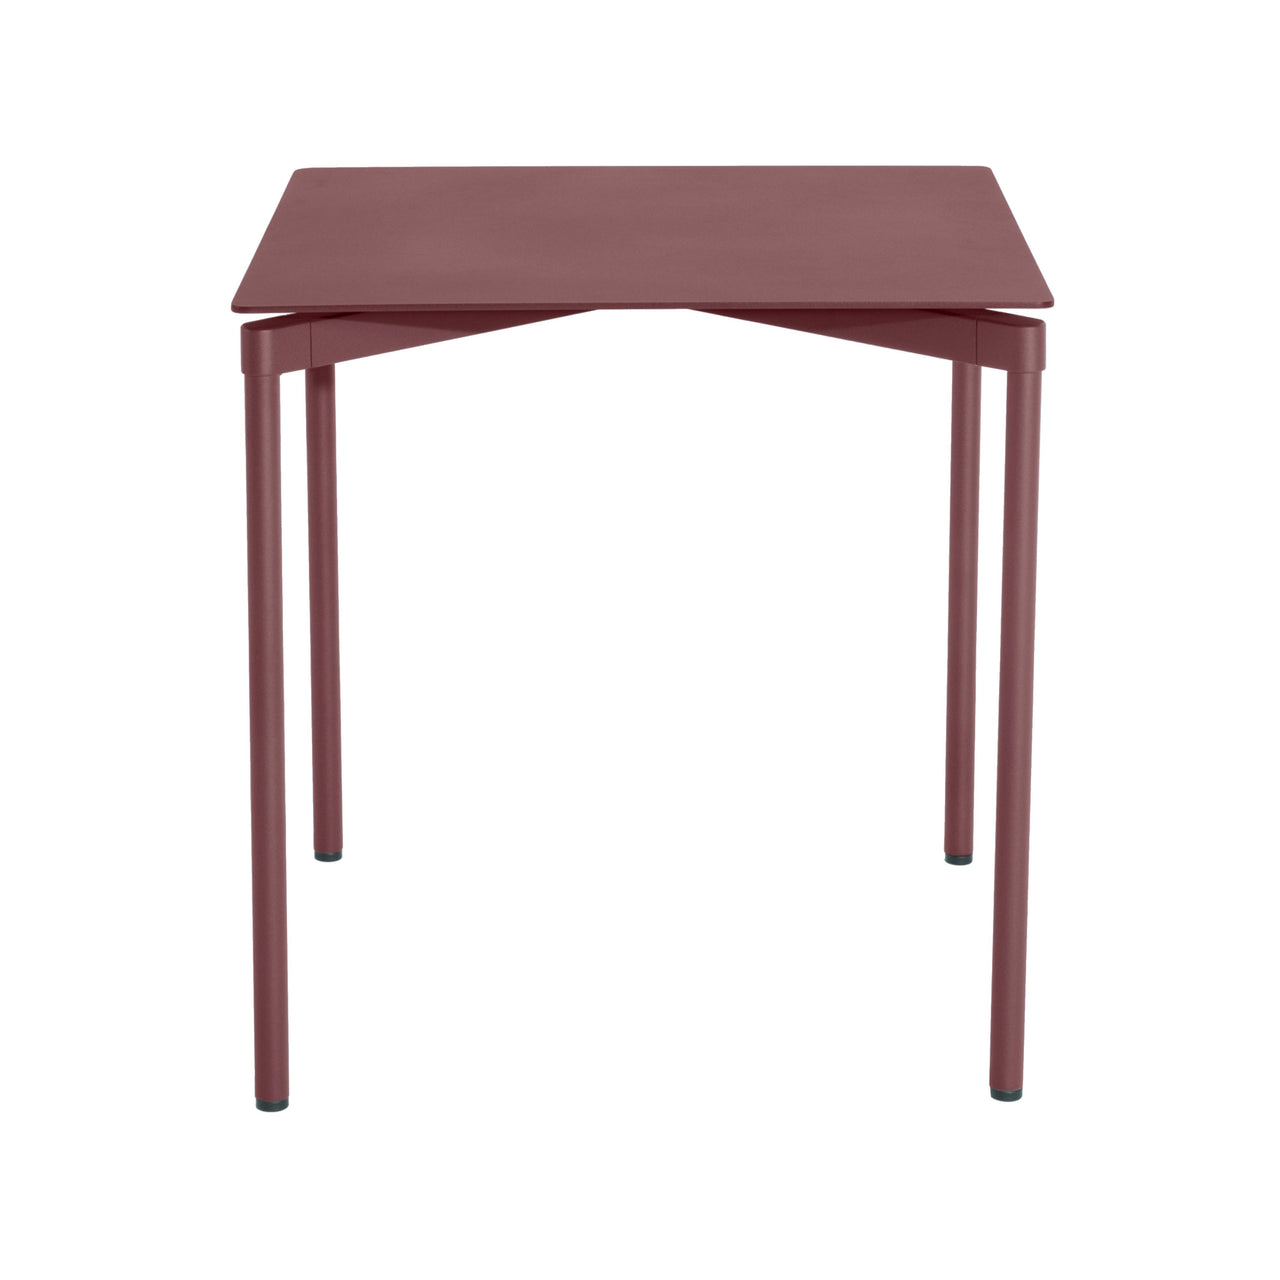 Fromme Dining Table: Square + Brown Red